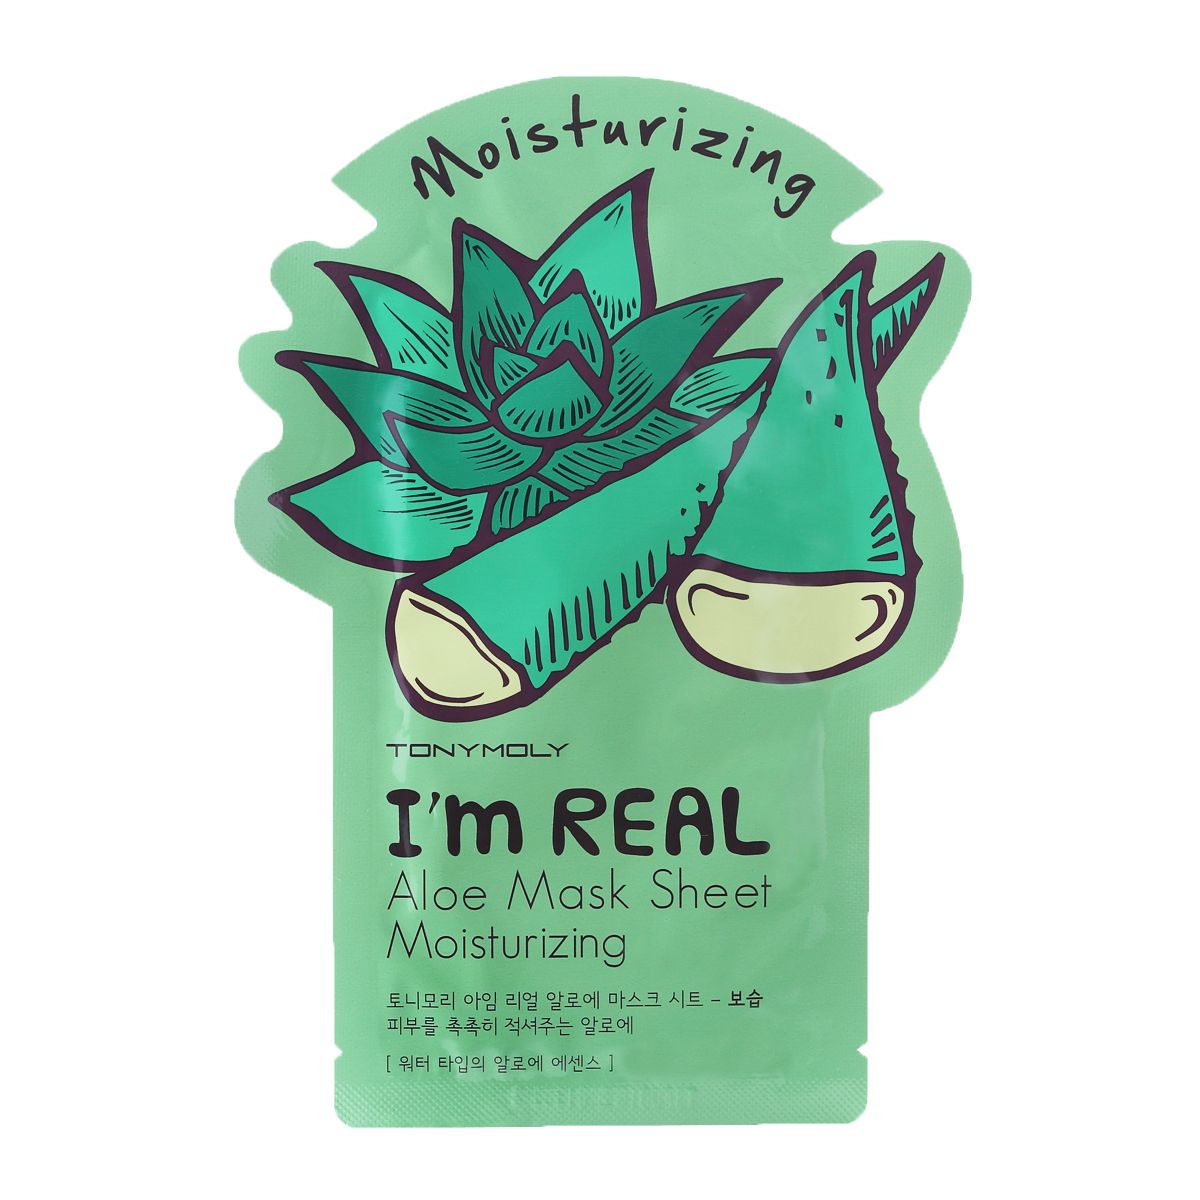 Tony Moly I'm Real Aloe Sheet Mask kopen NagelMusthaves Voor 20.00u, in huis